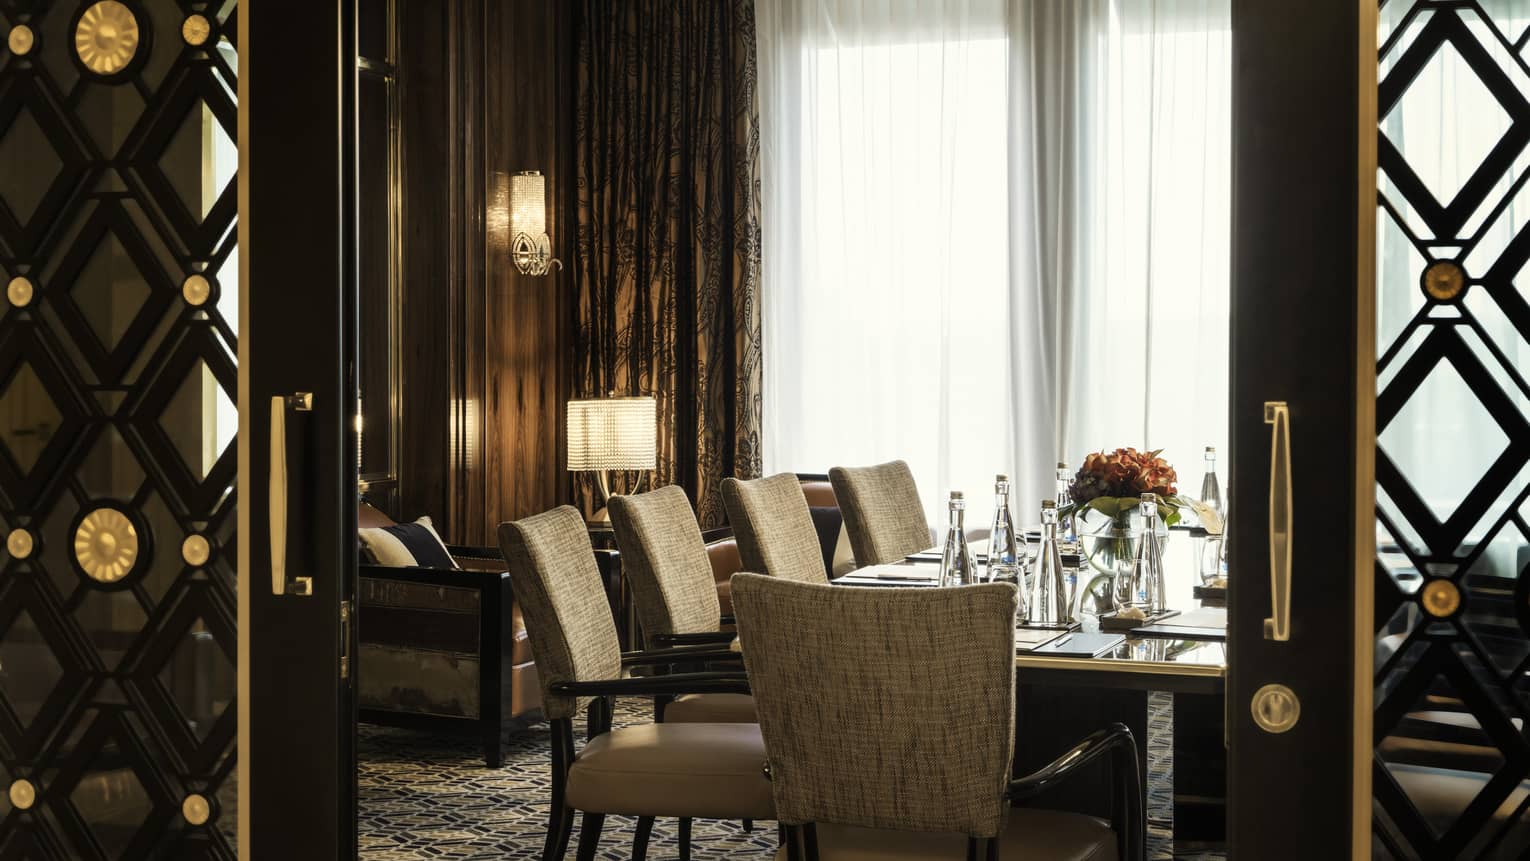 Four Seasons Hotel Jakarta's Salon 2 dining room for private dining